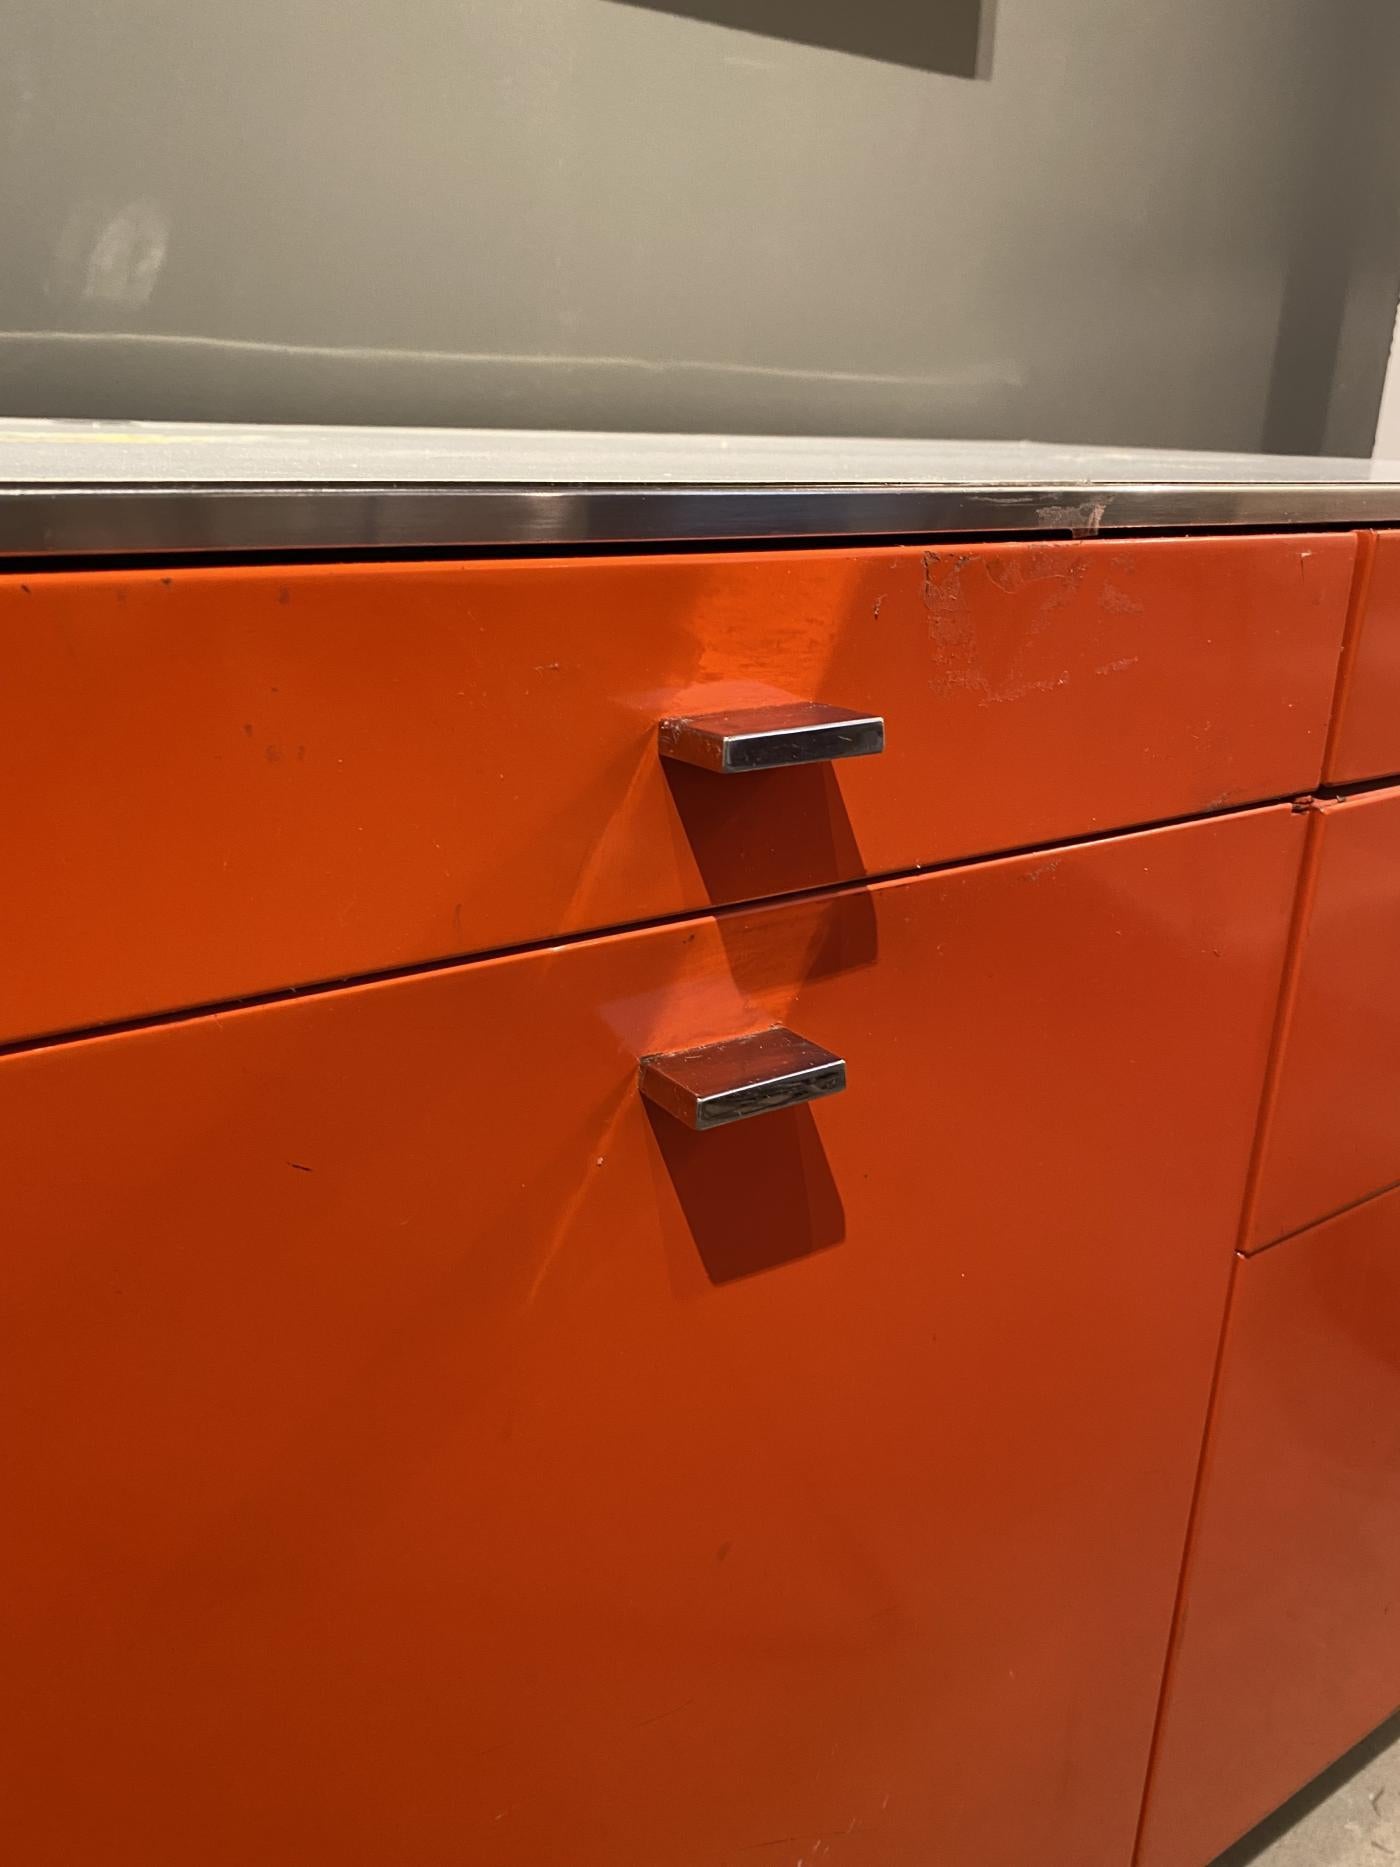 Industrial credenza in bright orange by Davis Allen for GoodForm. White laminate top, shop-painted metal in orange, and polished stainless steel drawer pulls and legs. Four shallow drawers, two deeper drawers, two file drawers, and two hinged